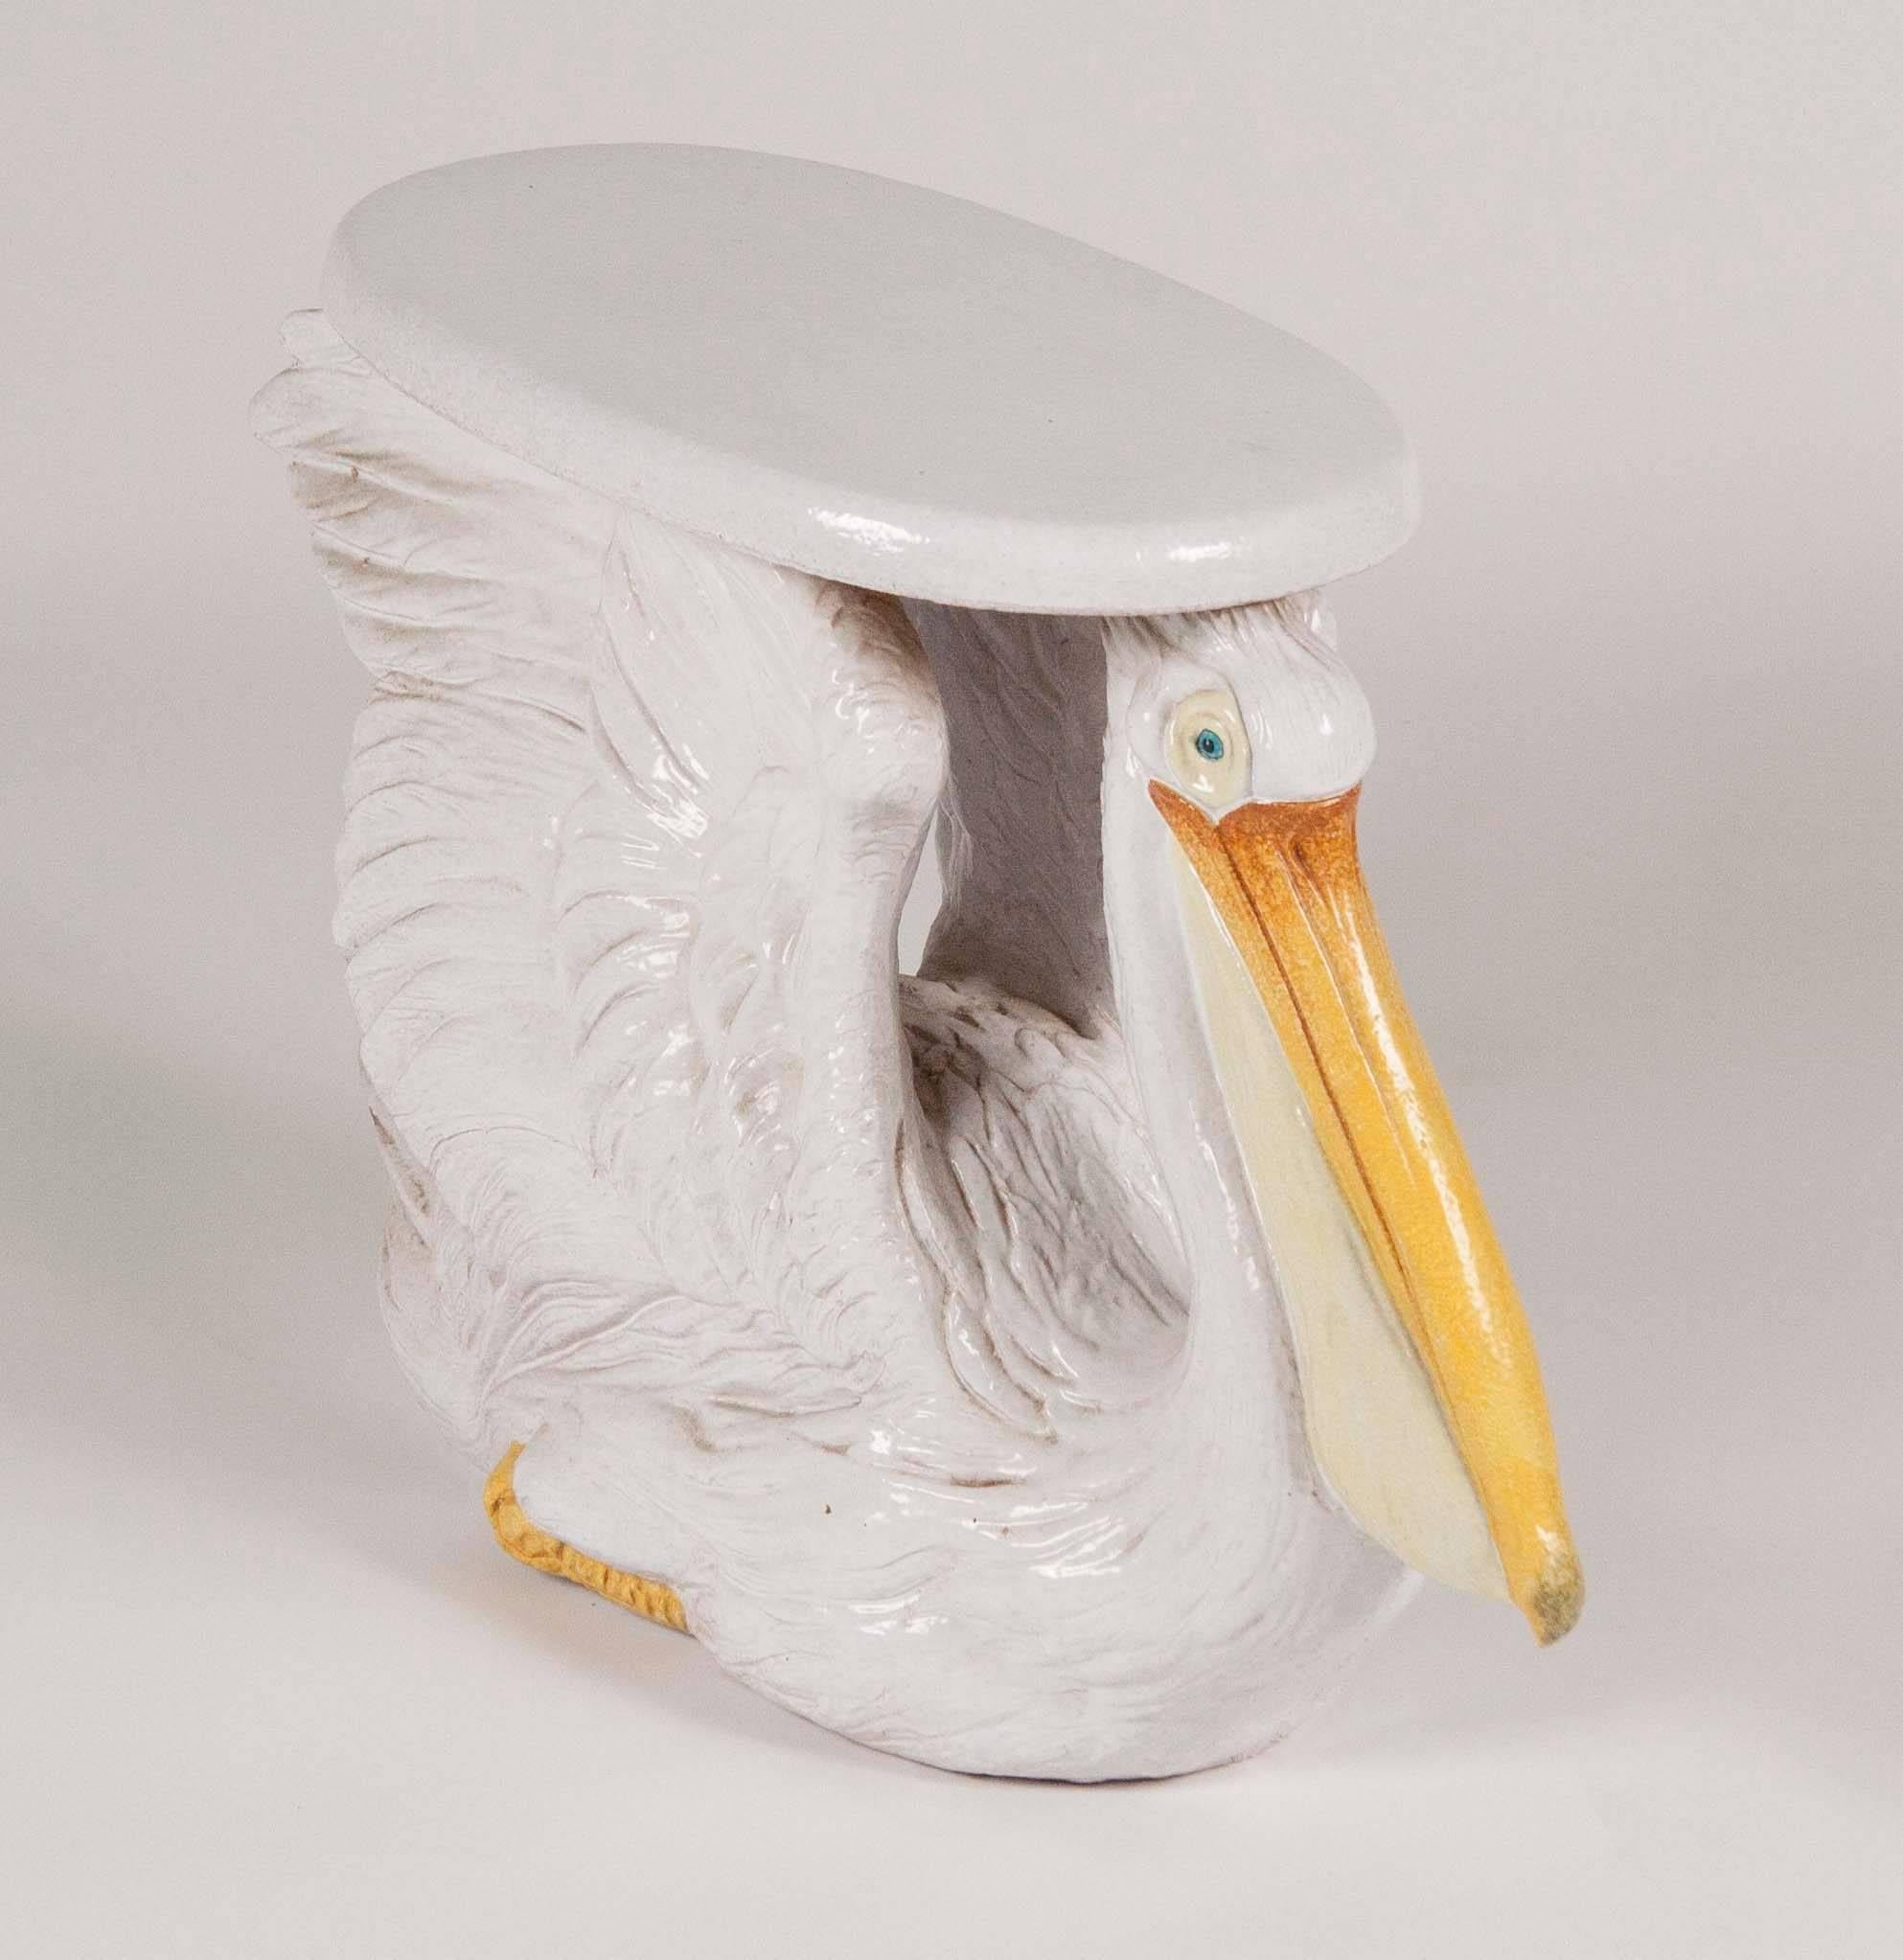 Whimsical Italian terracotta garden seat in the form of a pelican.